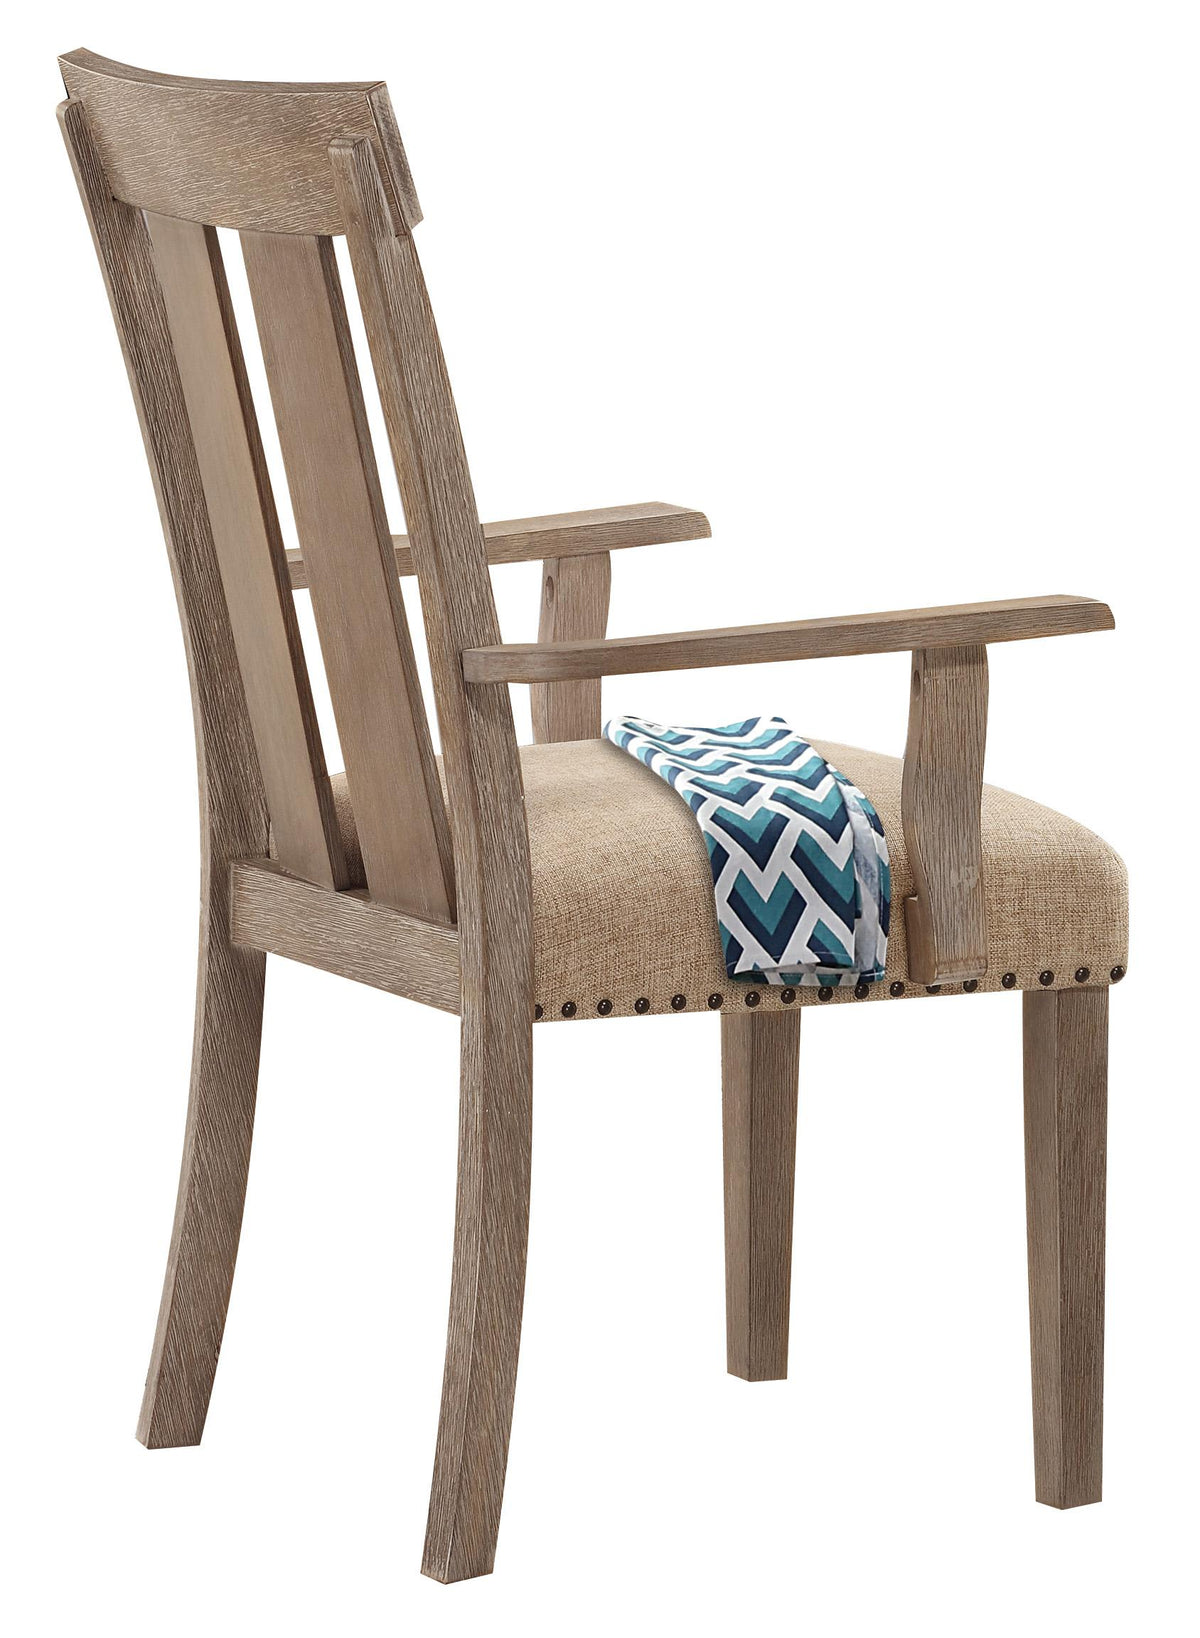 Nathaniel Fabric & Maple Arm Chair , Slatted Back  Las Vegas Furniture Stores